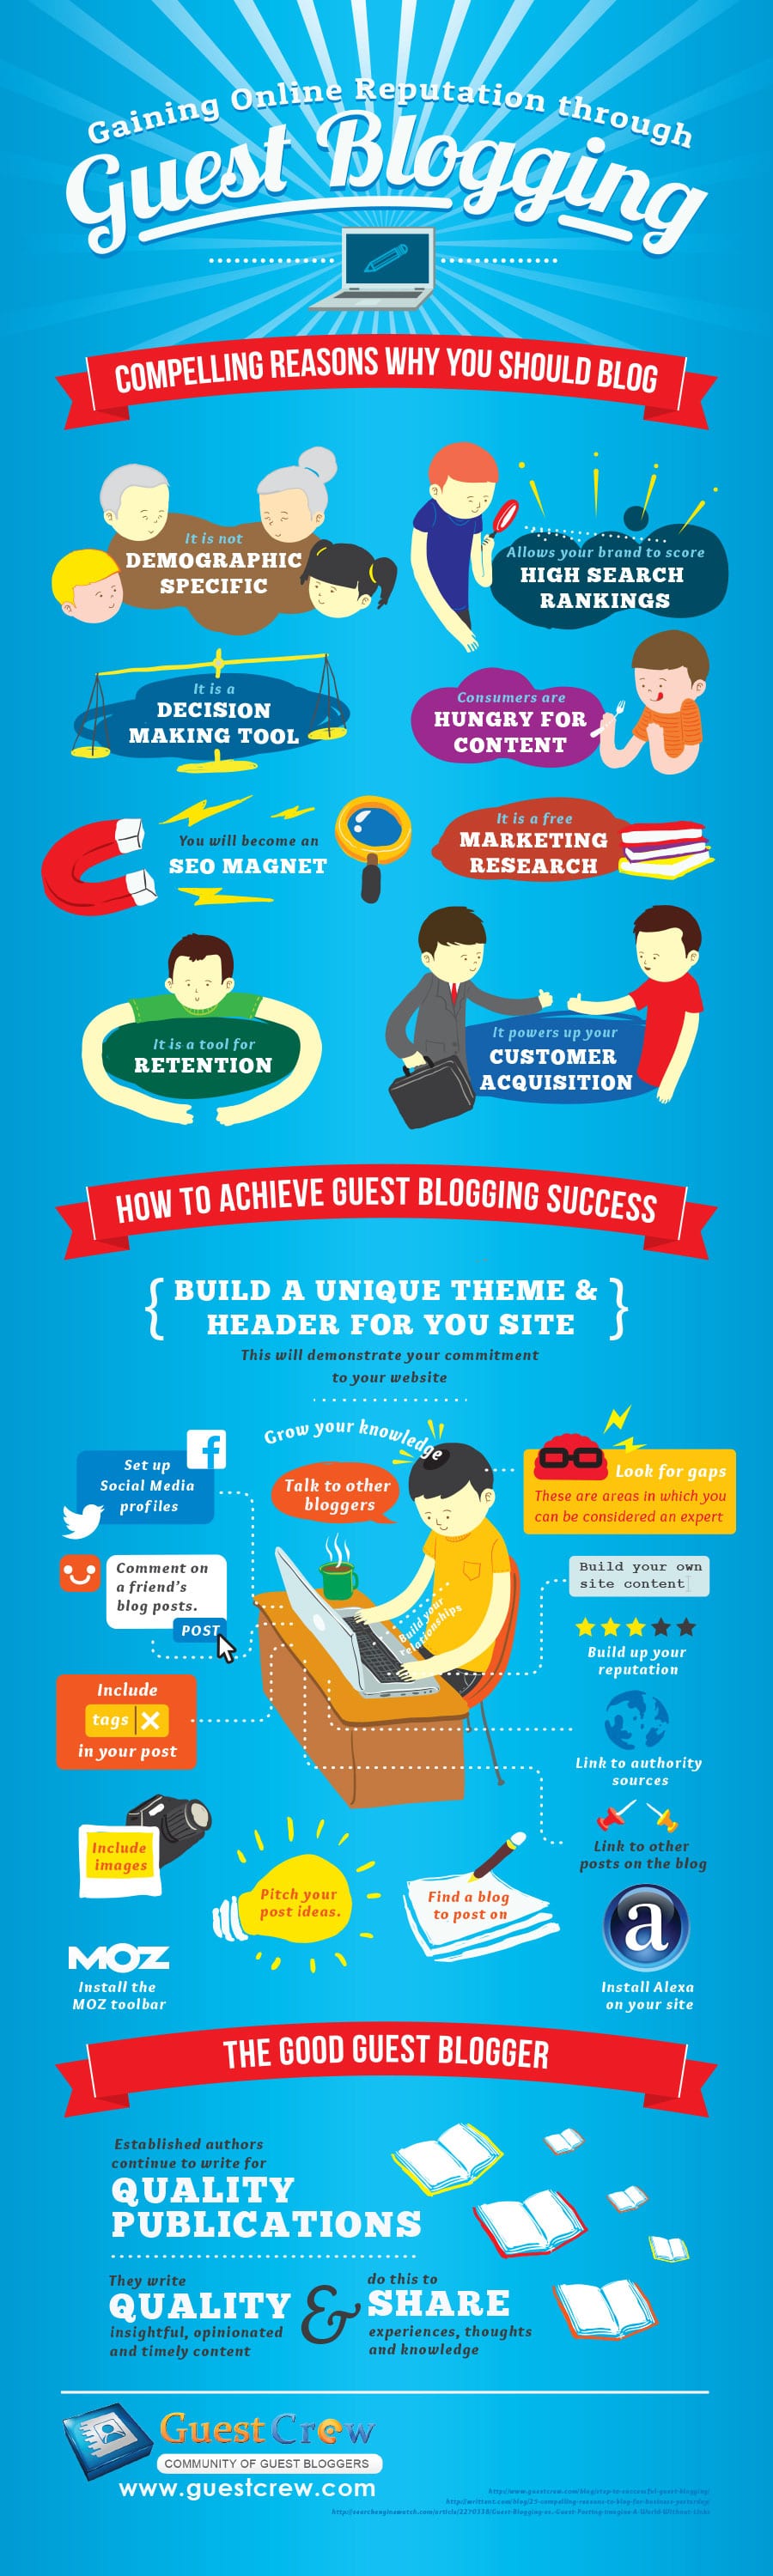 Increase Your Online Influence Through Guest Blogging [Infographic]